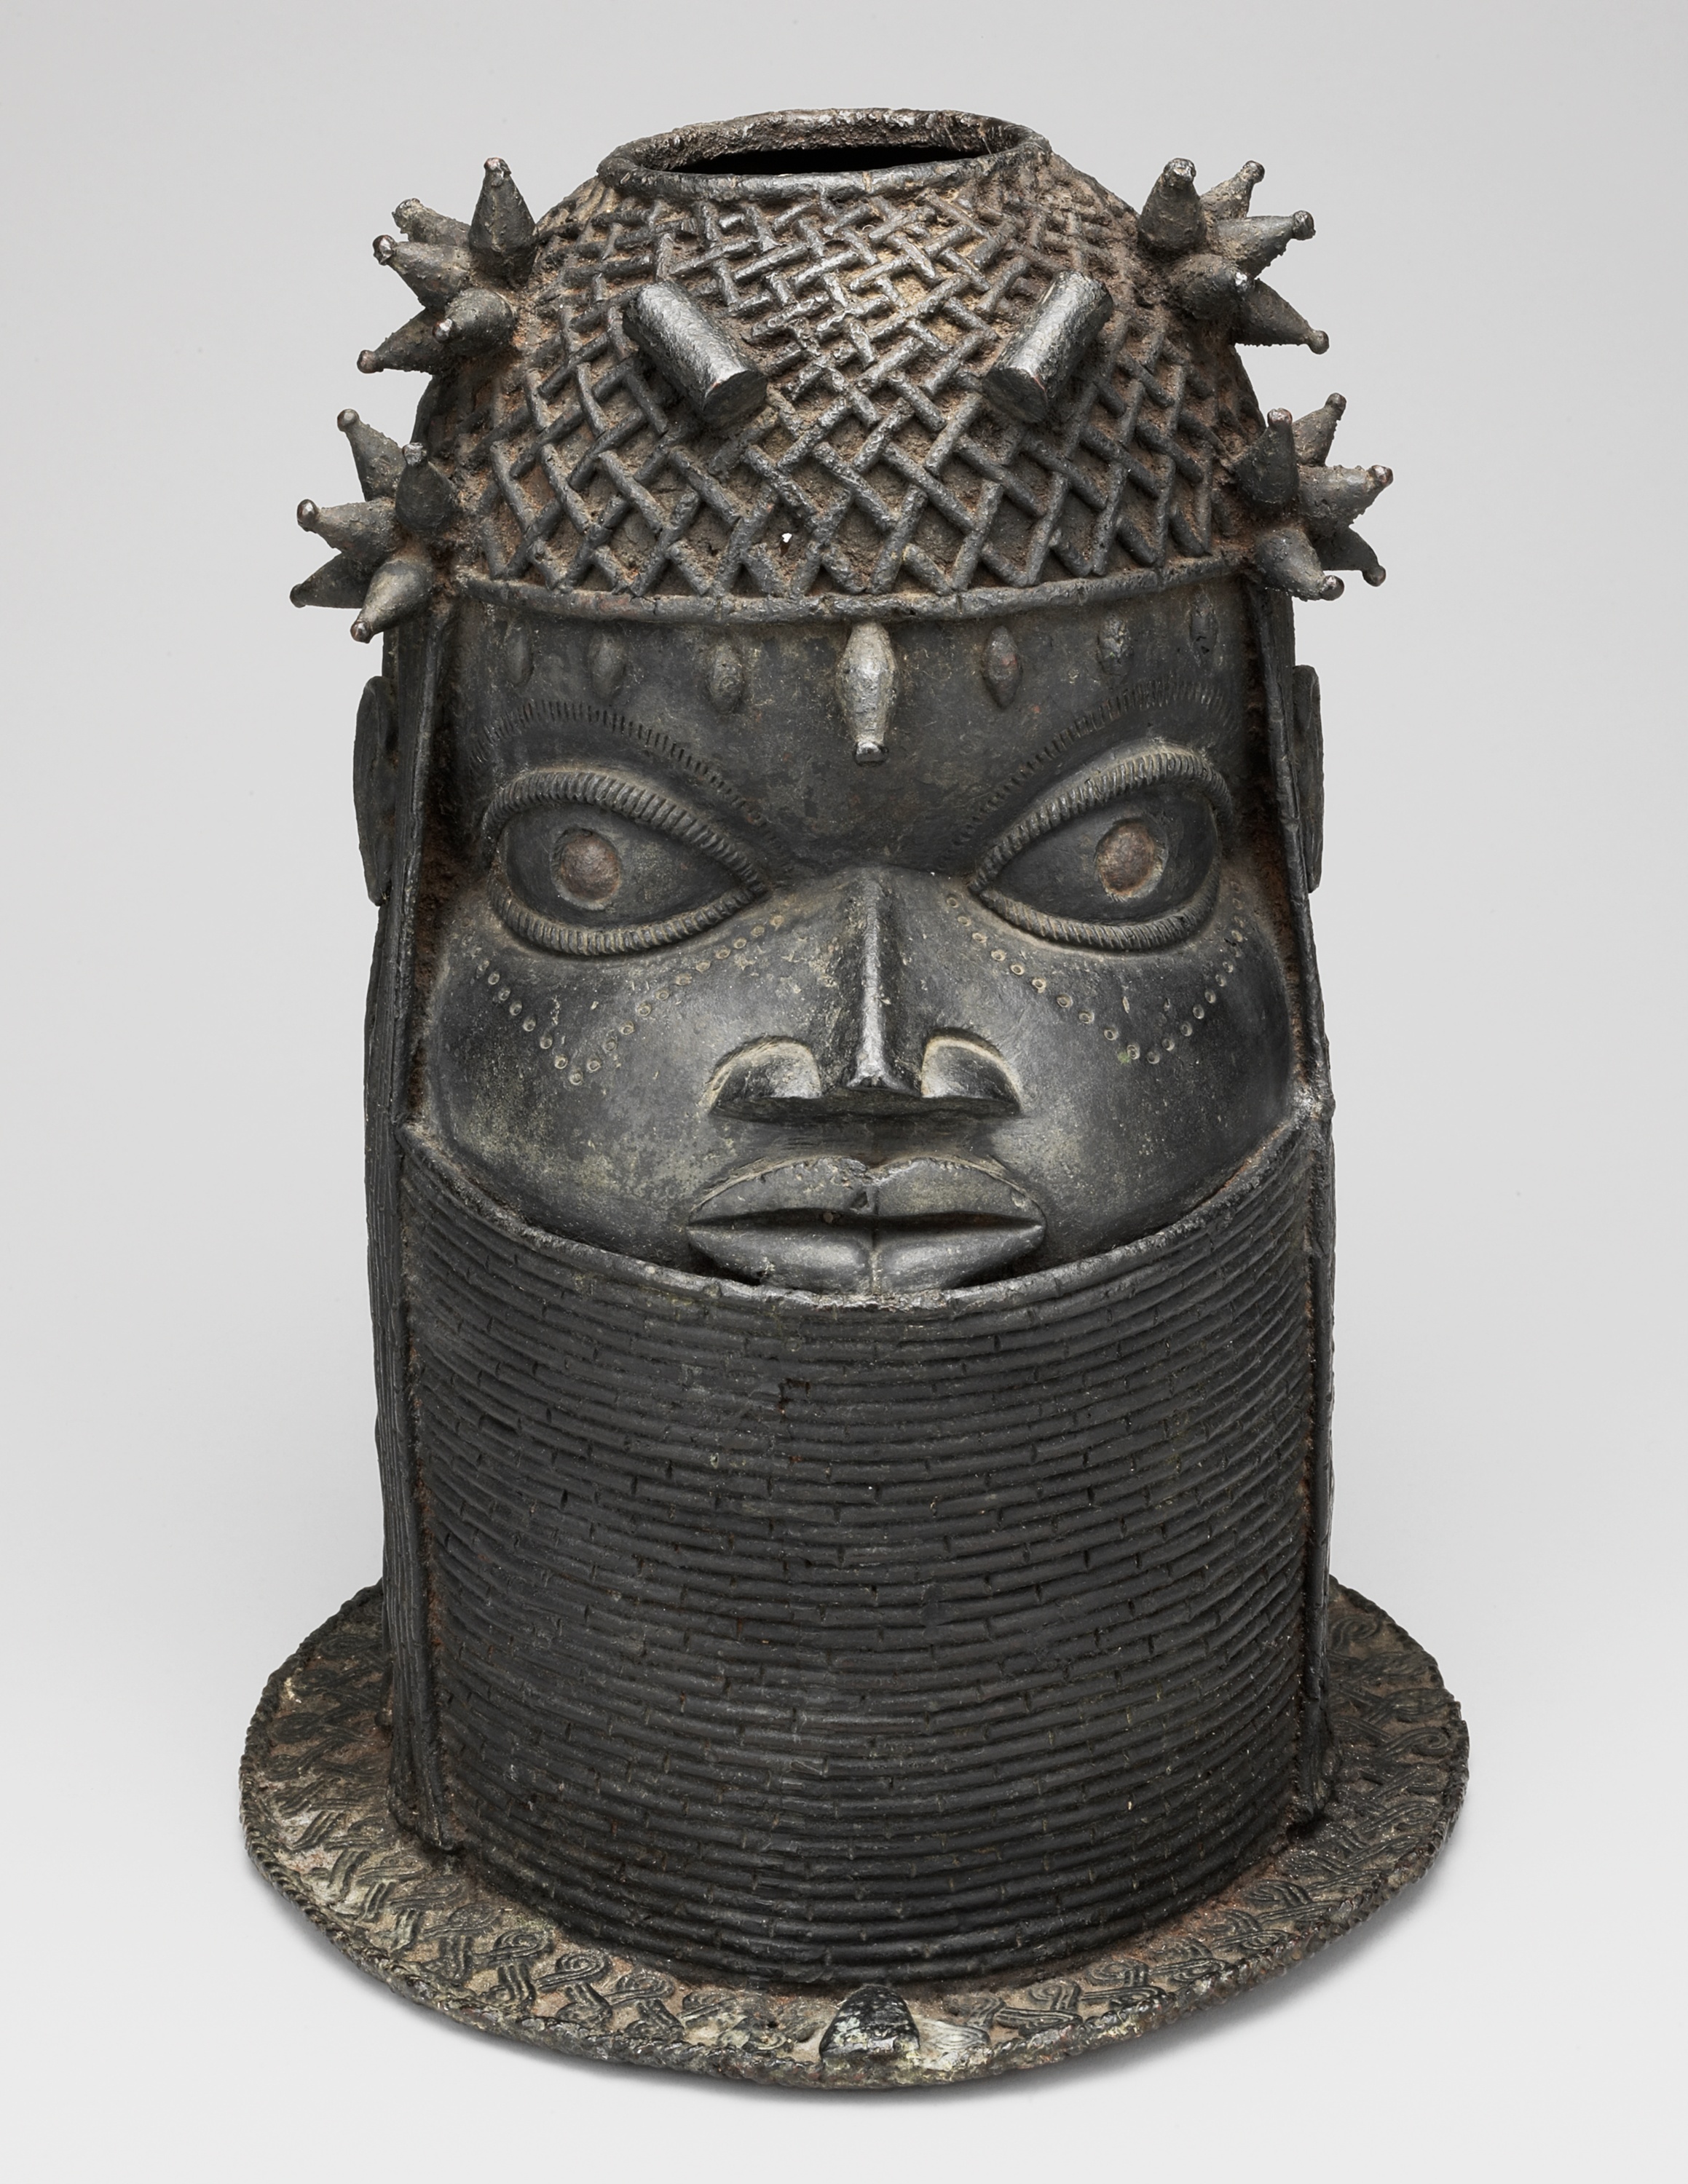 Head (Uhunmwun Elao) by Unknown Artist - 18th/early 19th century - 32.4 cm Art Institute of Chicago